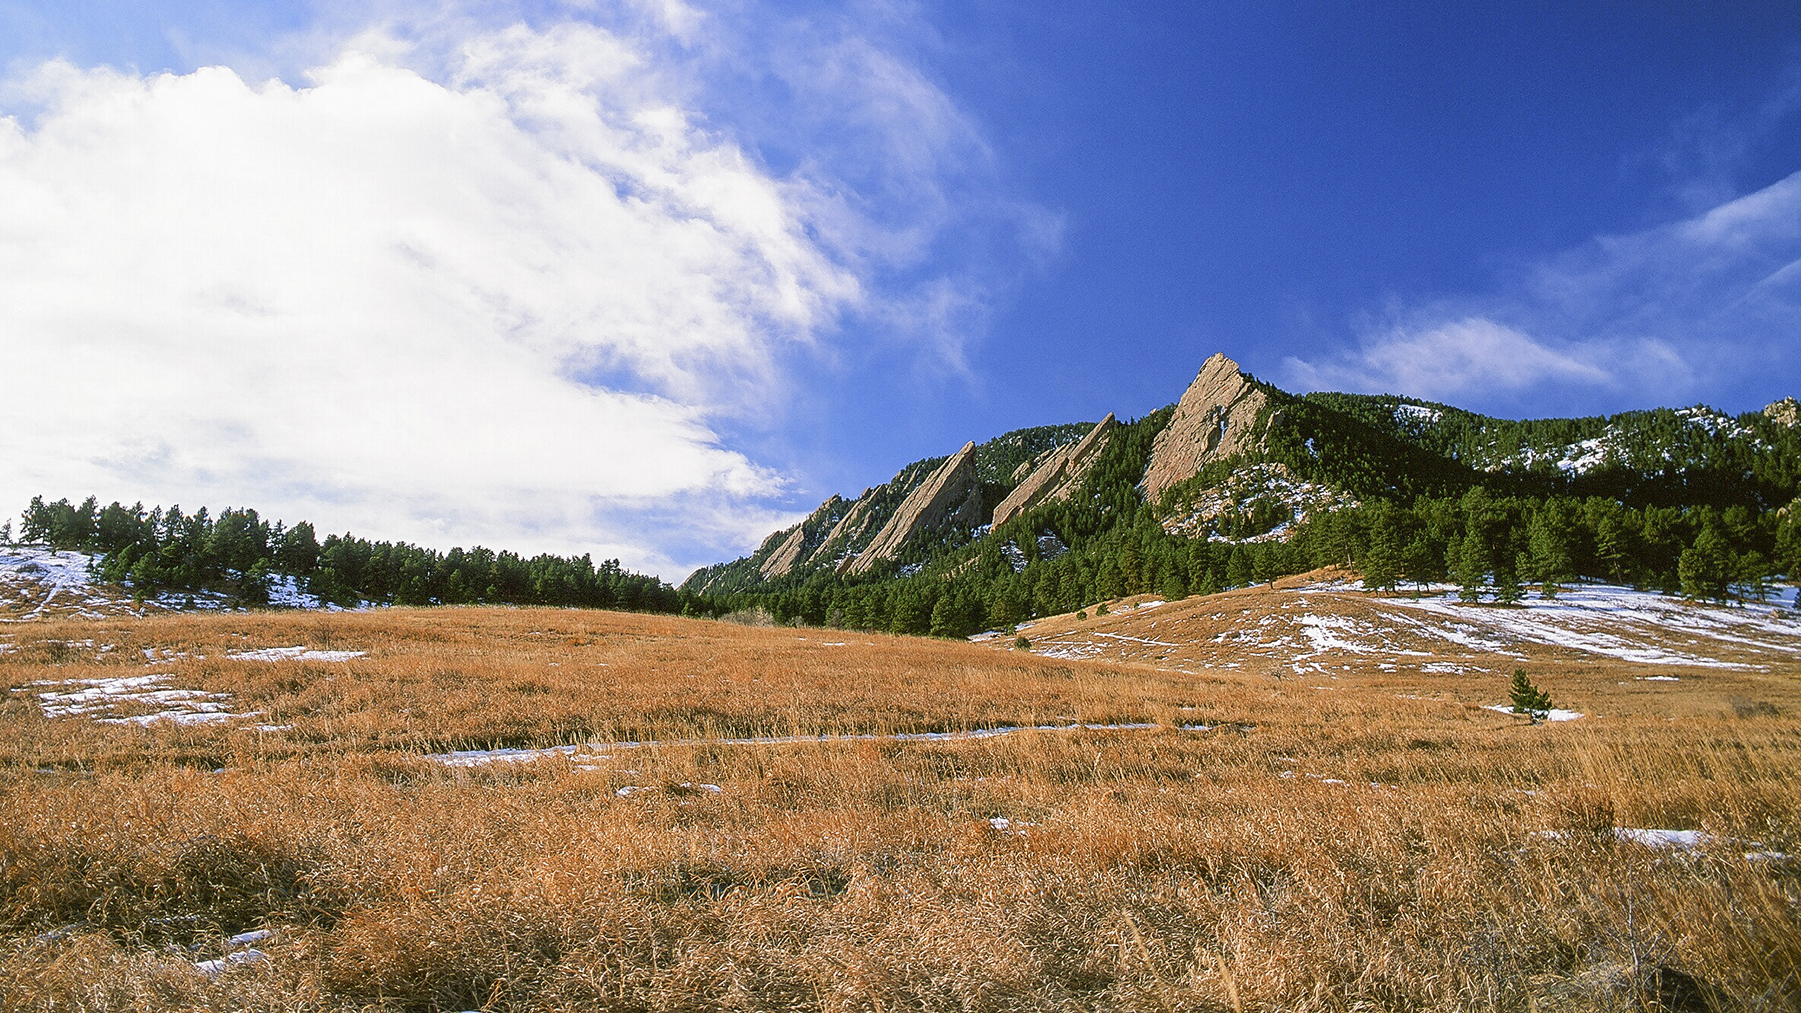 Sun shines on the Boulder Flatirons while clouds cross the sky.